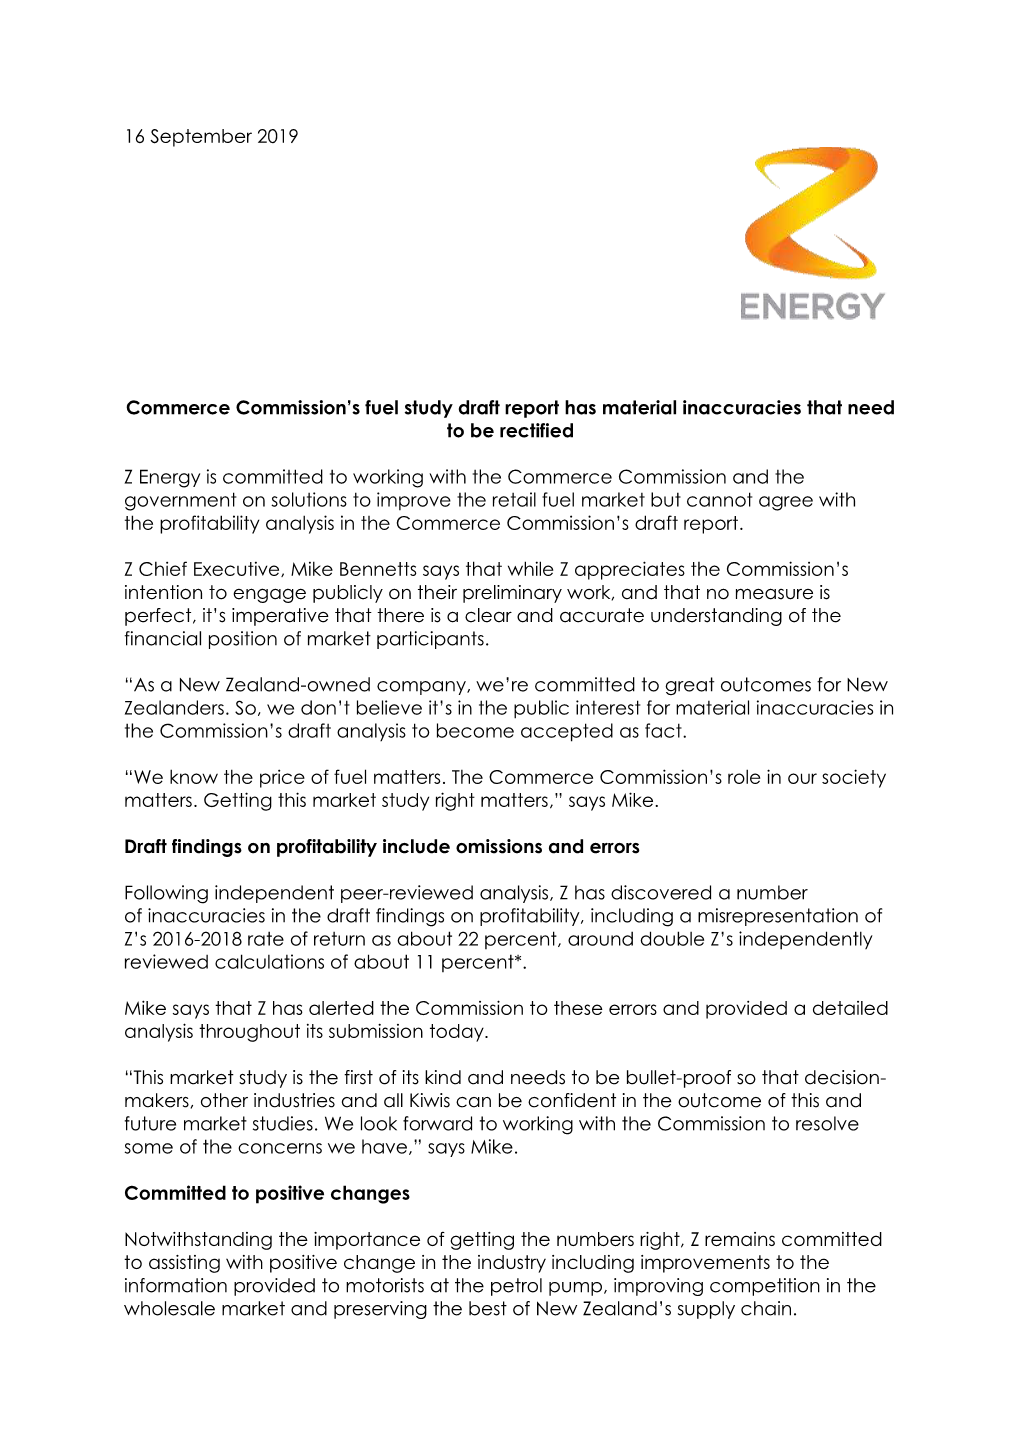 16 September 2019 Commerce Commission's Fuel Study Draft Report